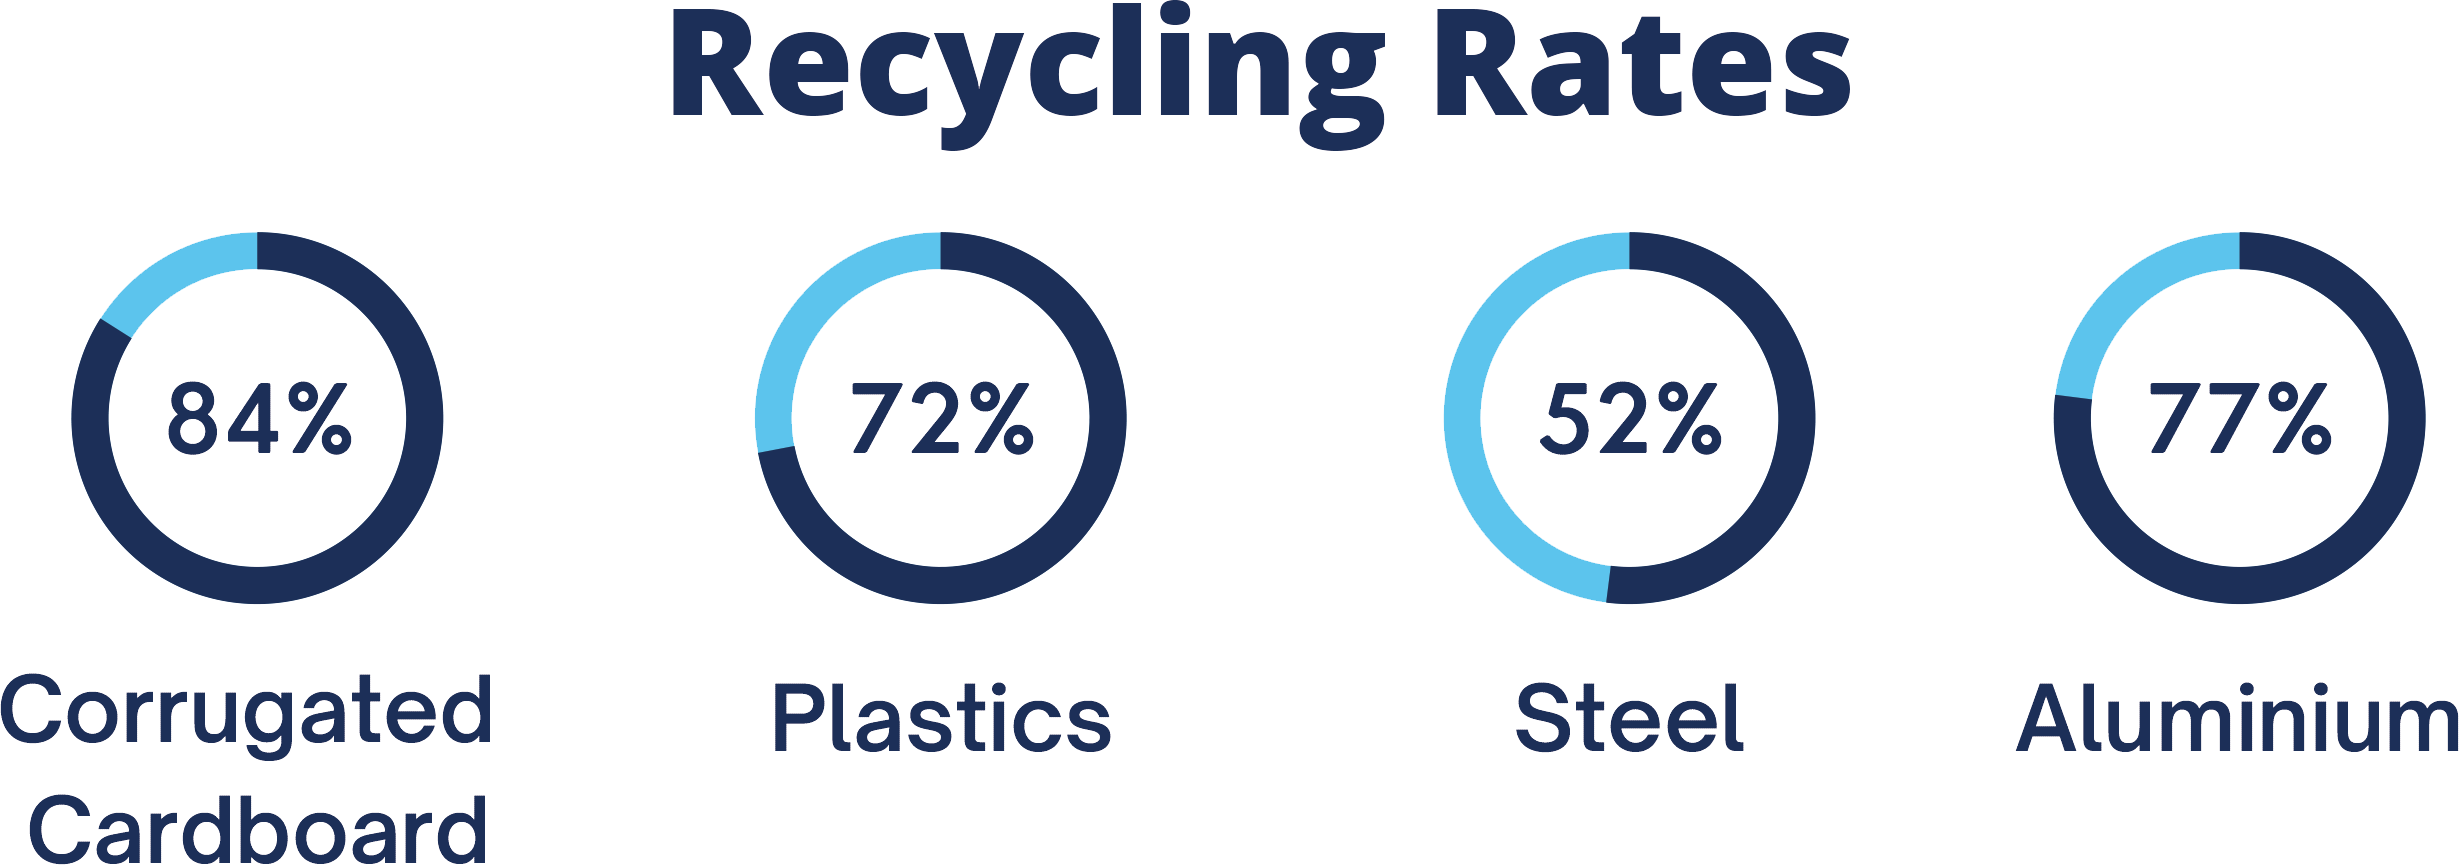 Recycling Rates